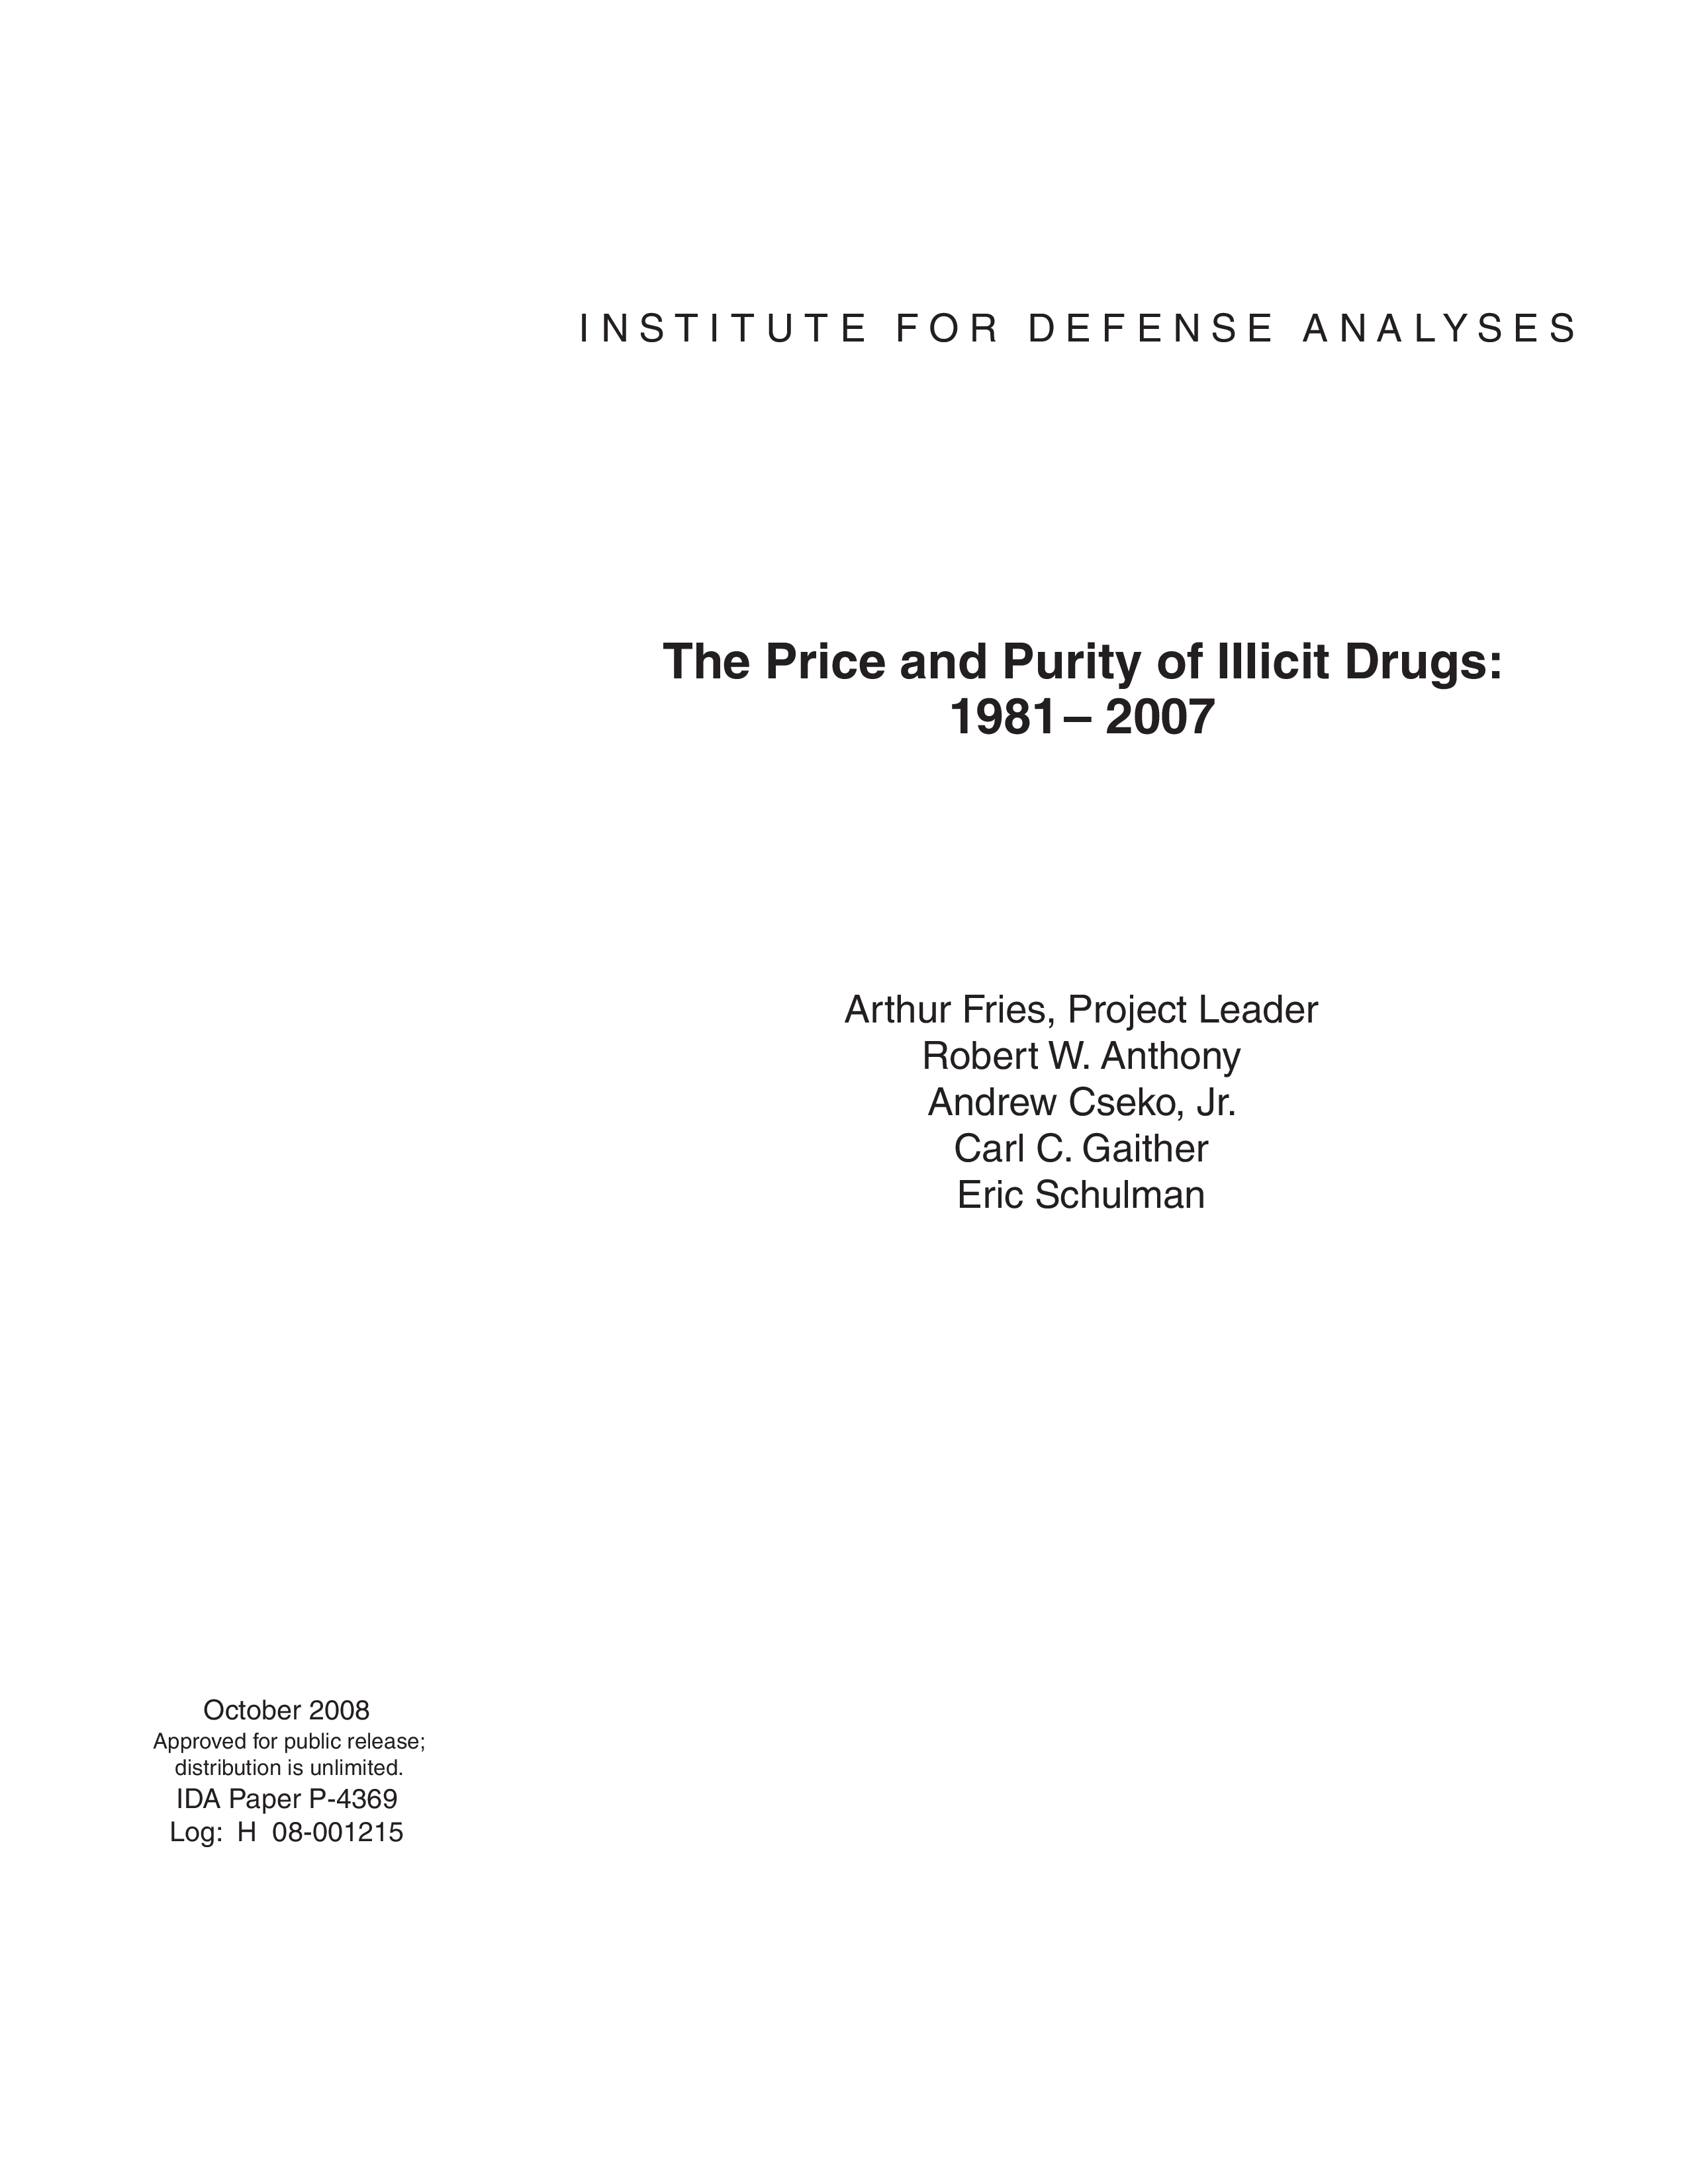 The Price and Purity of Illicit Drugs: 1981 – 2007